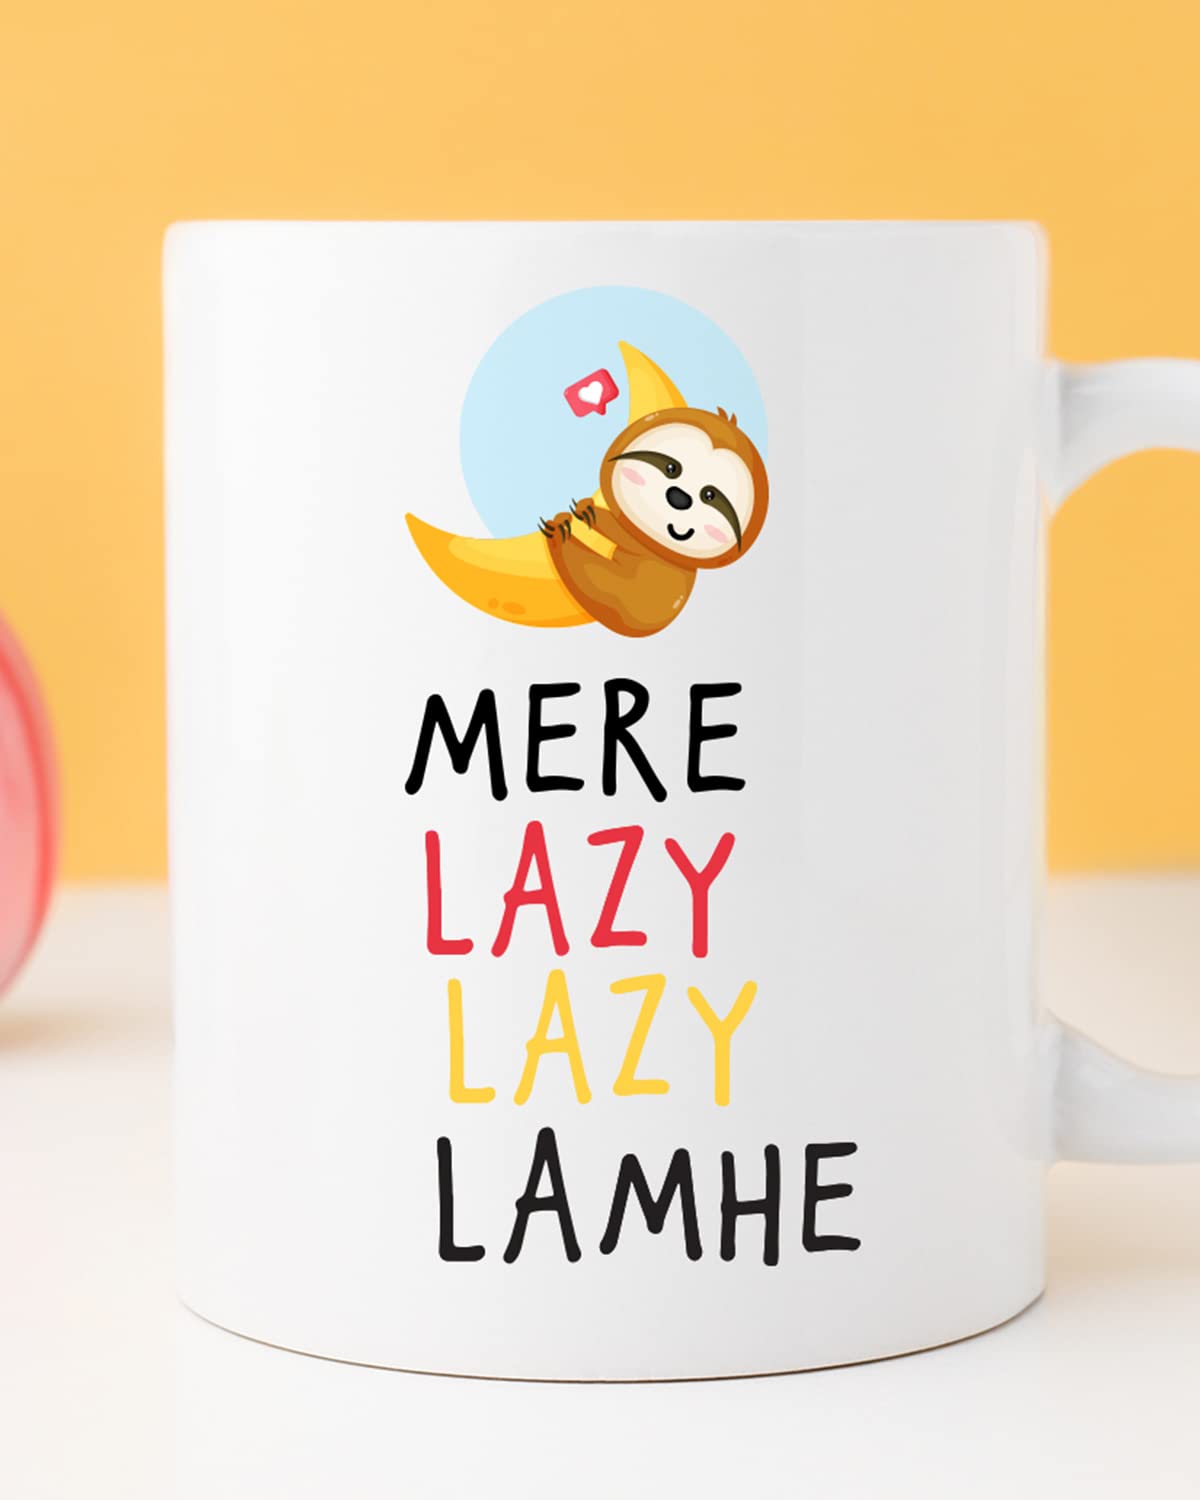 Mere Lazy Lazy LAMHE Coffee Mug - Gift for Friend, Birthday Gift, Birthday Mug, Motivational Quotes Mug, Mugs with Funny & Funky Dialogues, Bollywood Mugs, Funny Mugs for Him & Her